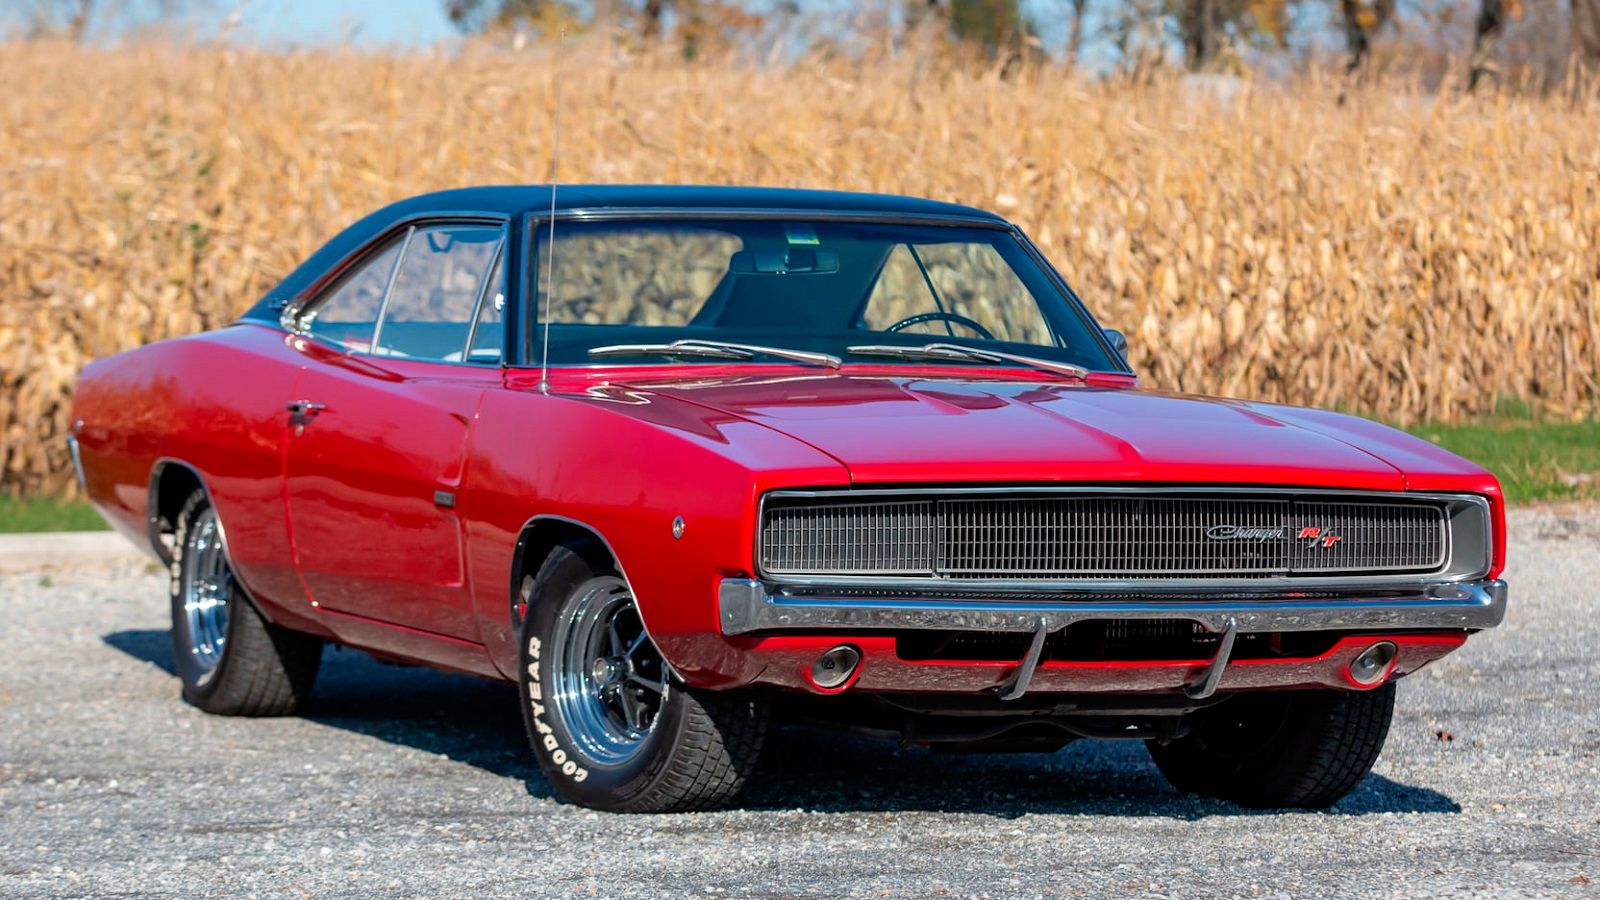 A parked 1968 Dodge Hemi Charger R/T 